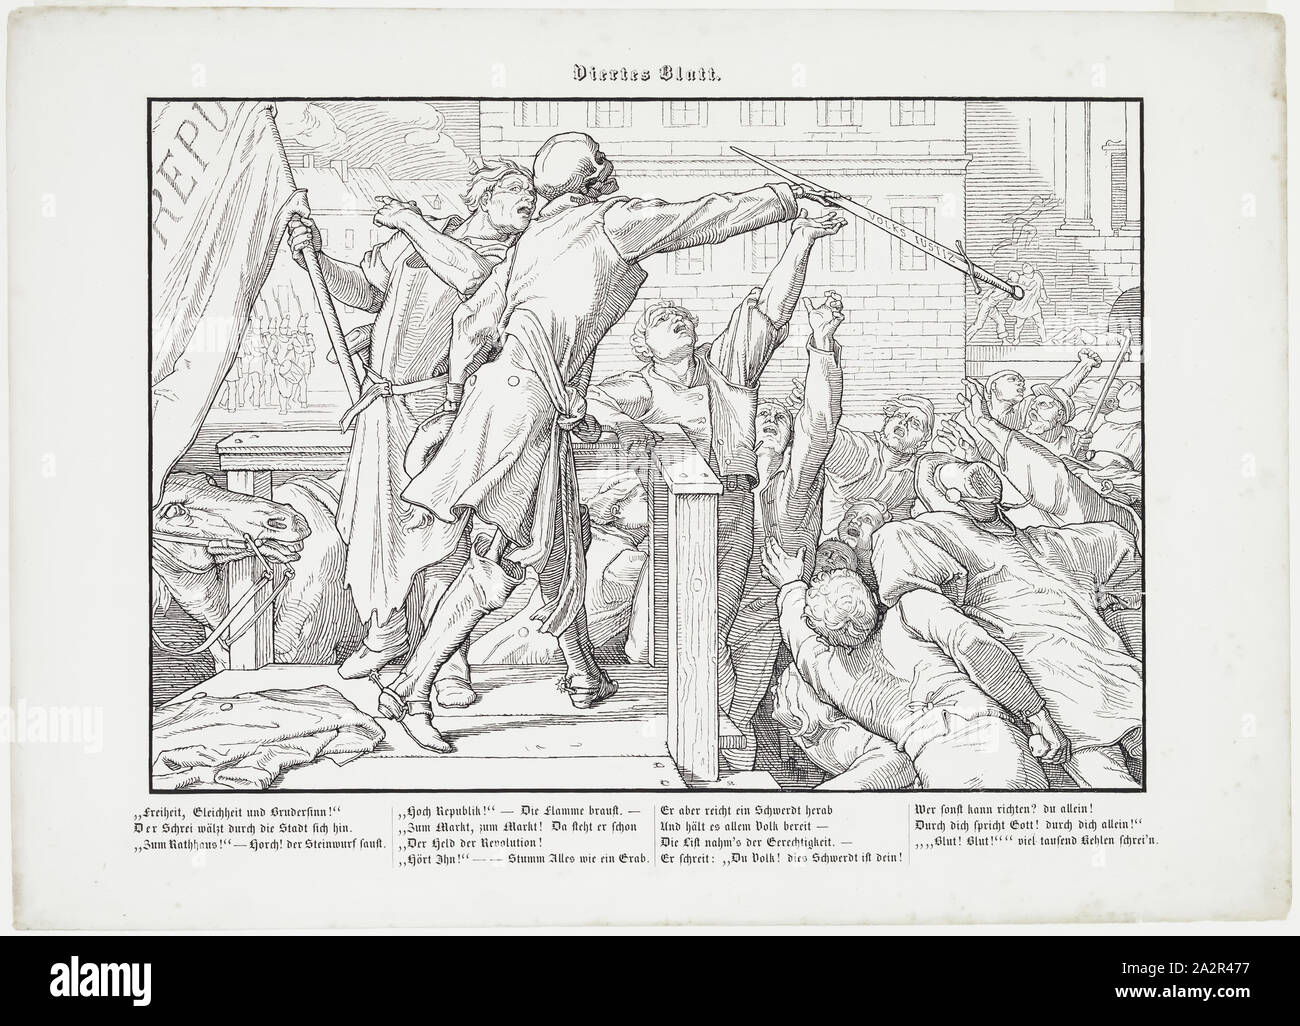 Alfred Rethel, German, 1816-1859, Death as Demagogue, 1848, woodcut printed in black ink on wove paper, Image (excluding letters): 8 3/4 × 12 5/8 inches (22.2 × 32.1 cm Stock Photo